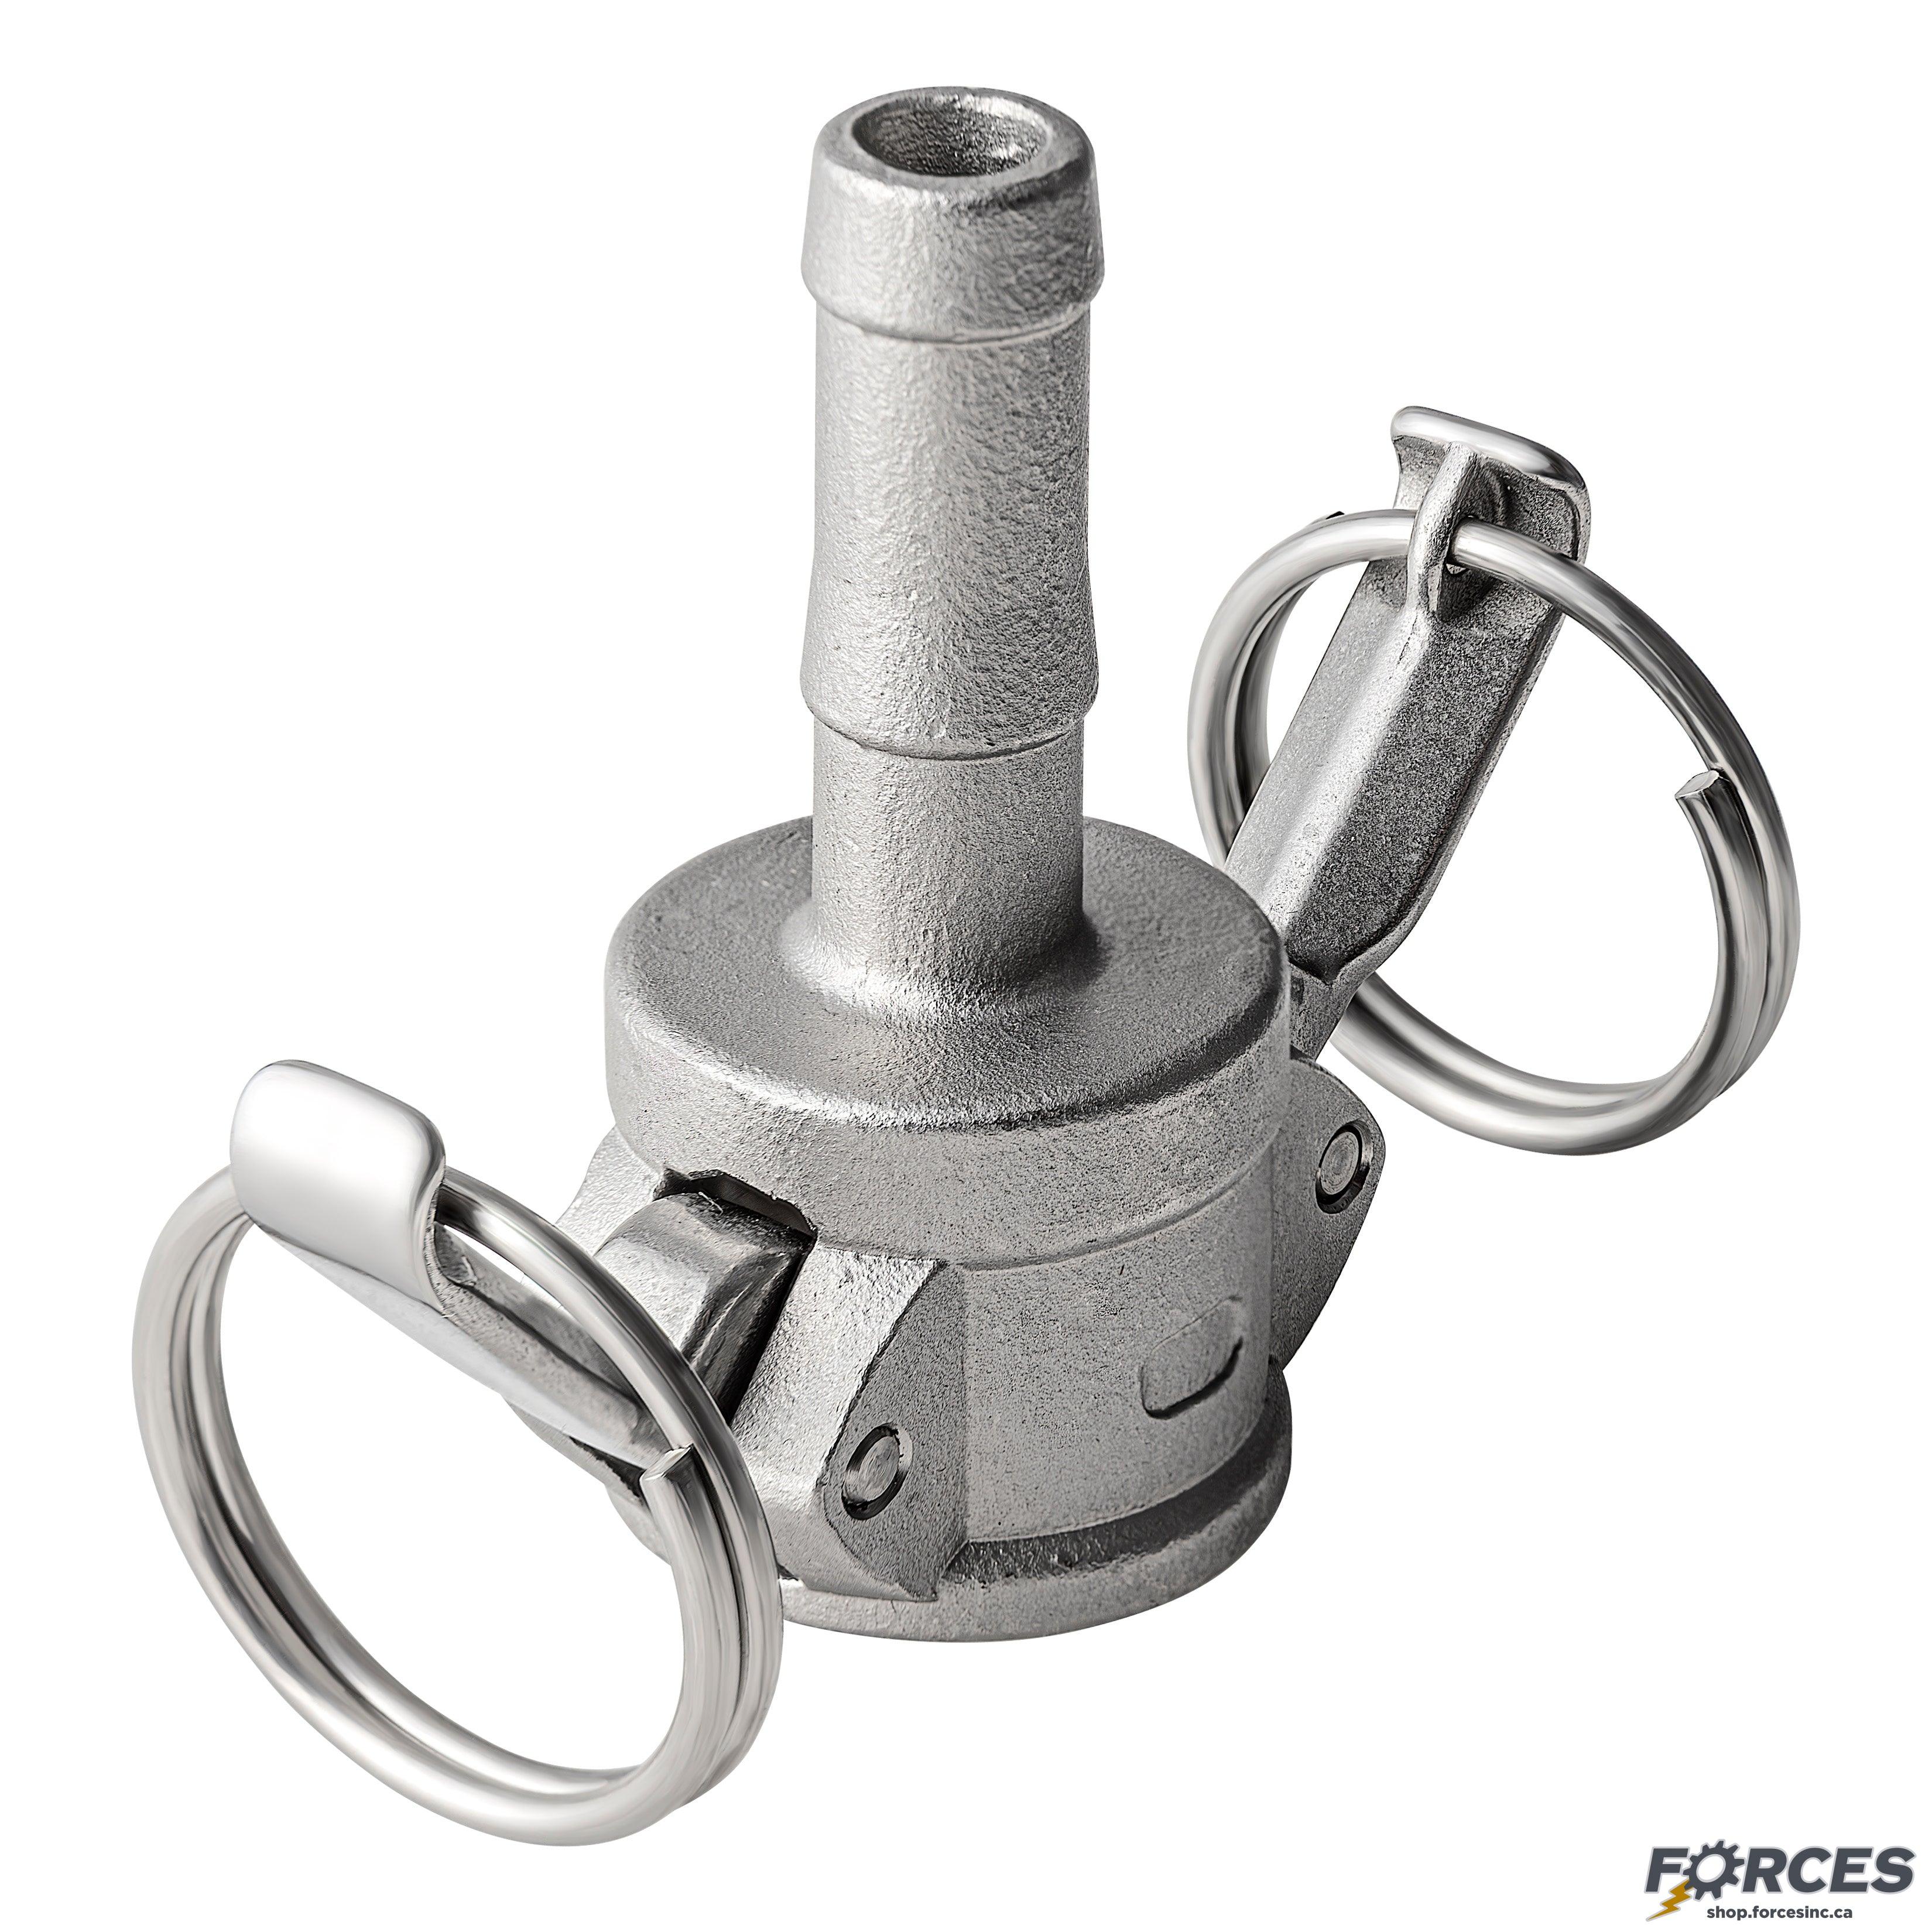 1-1/2" Type C Camlock Fitting Stainless Steel 316 - Forces Inc